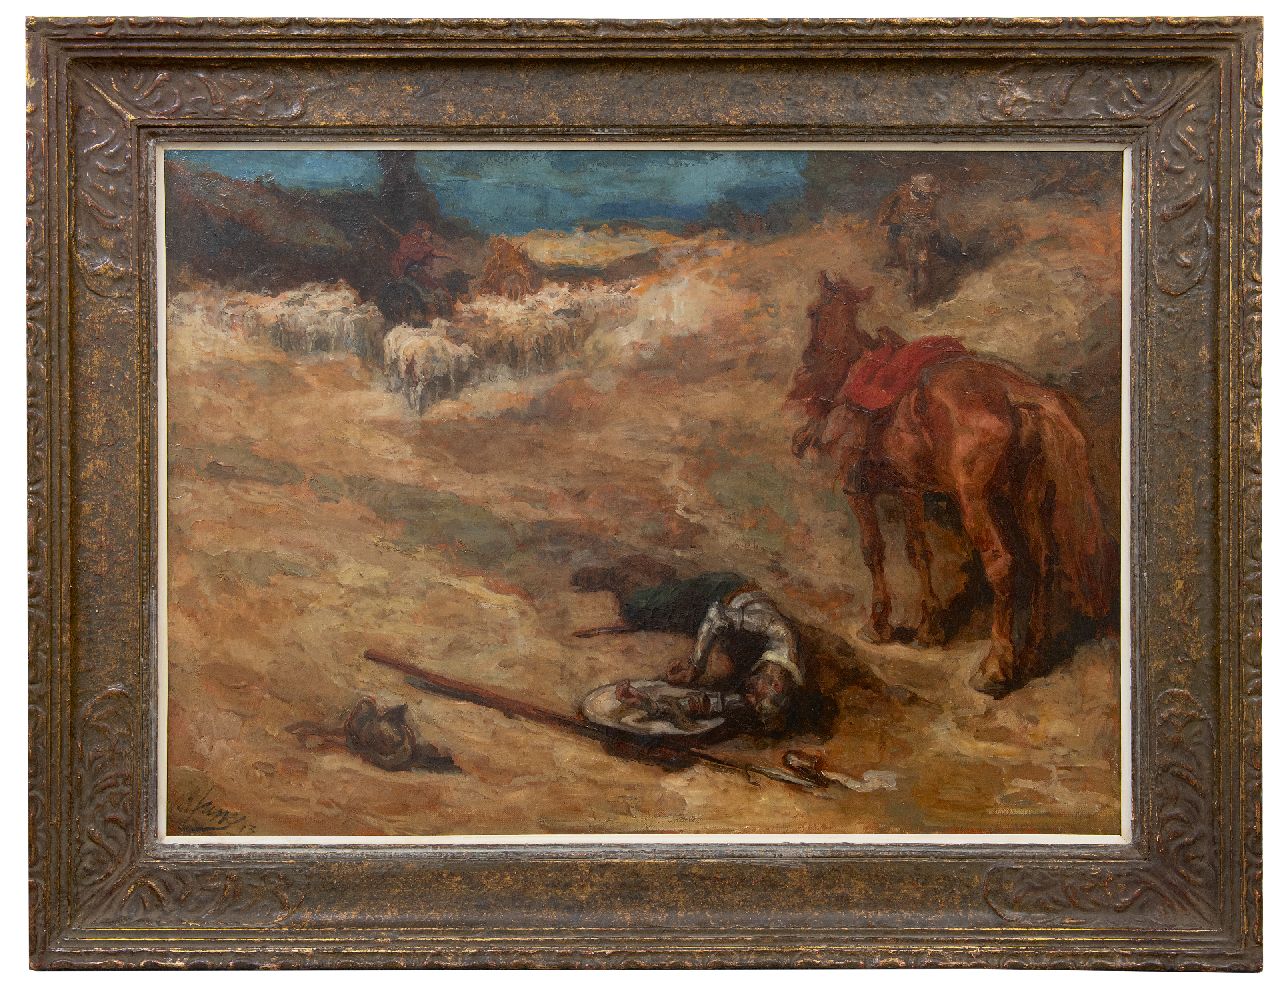 Jurres J.H.  | Johannes Hendricus Jurres | Paintings offered for sale | Scene from Don Quichot, oil on canvas 73.9 x 101.8 cm, signed l.l. and dated '13